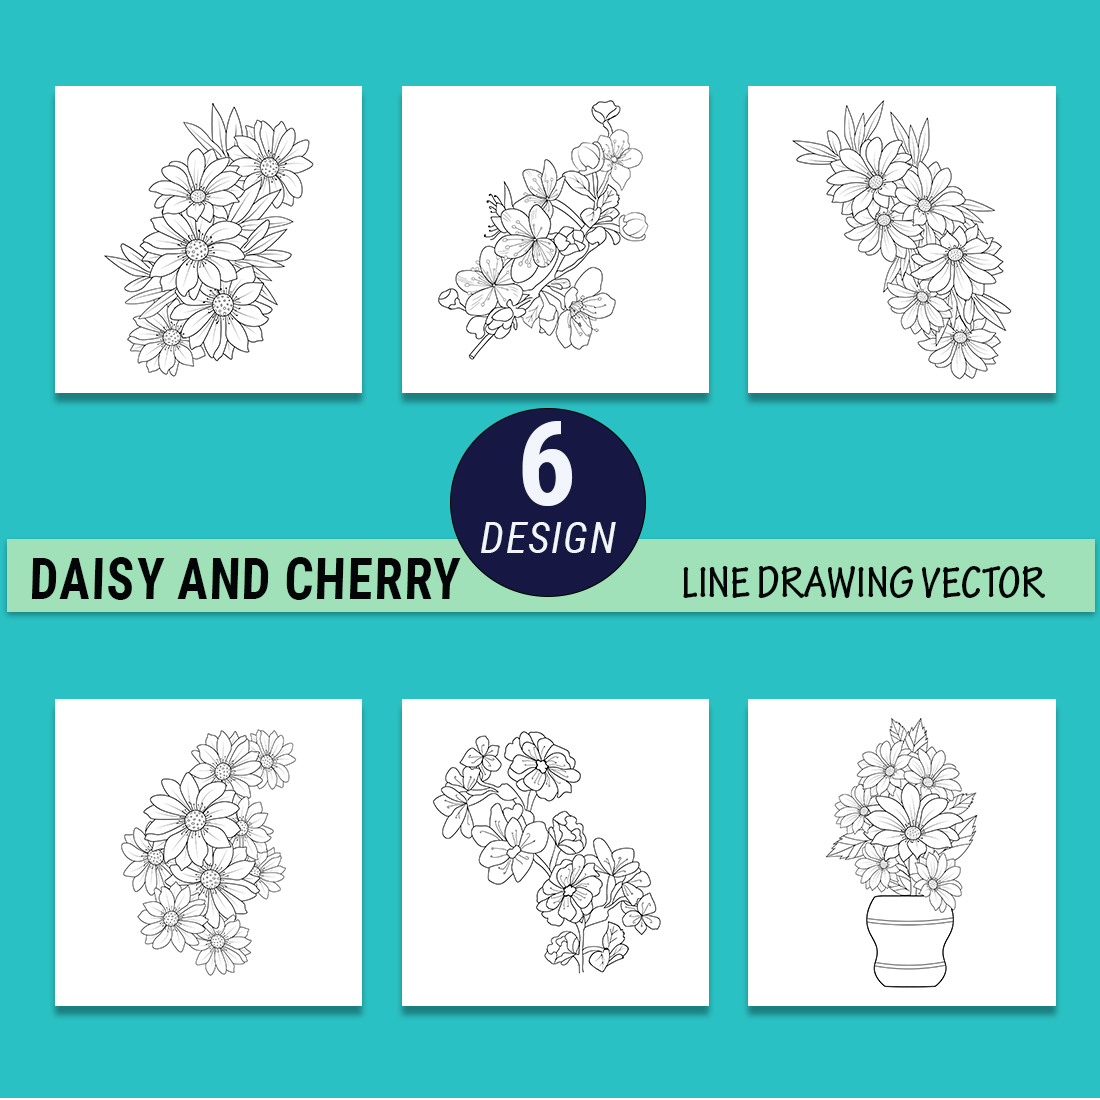 Daisy flower coloring pages, daisy flower bouquet tattoo, small daisy tattoo, cherry blossom tattoo black and white, cherry blossom drawing pencil preview image.